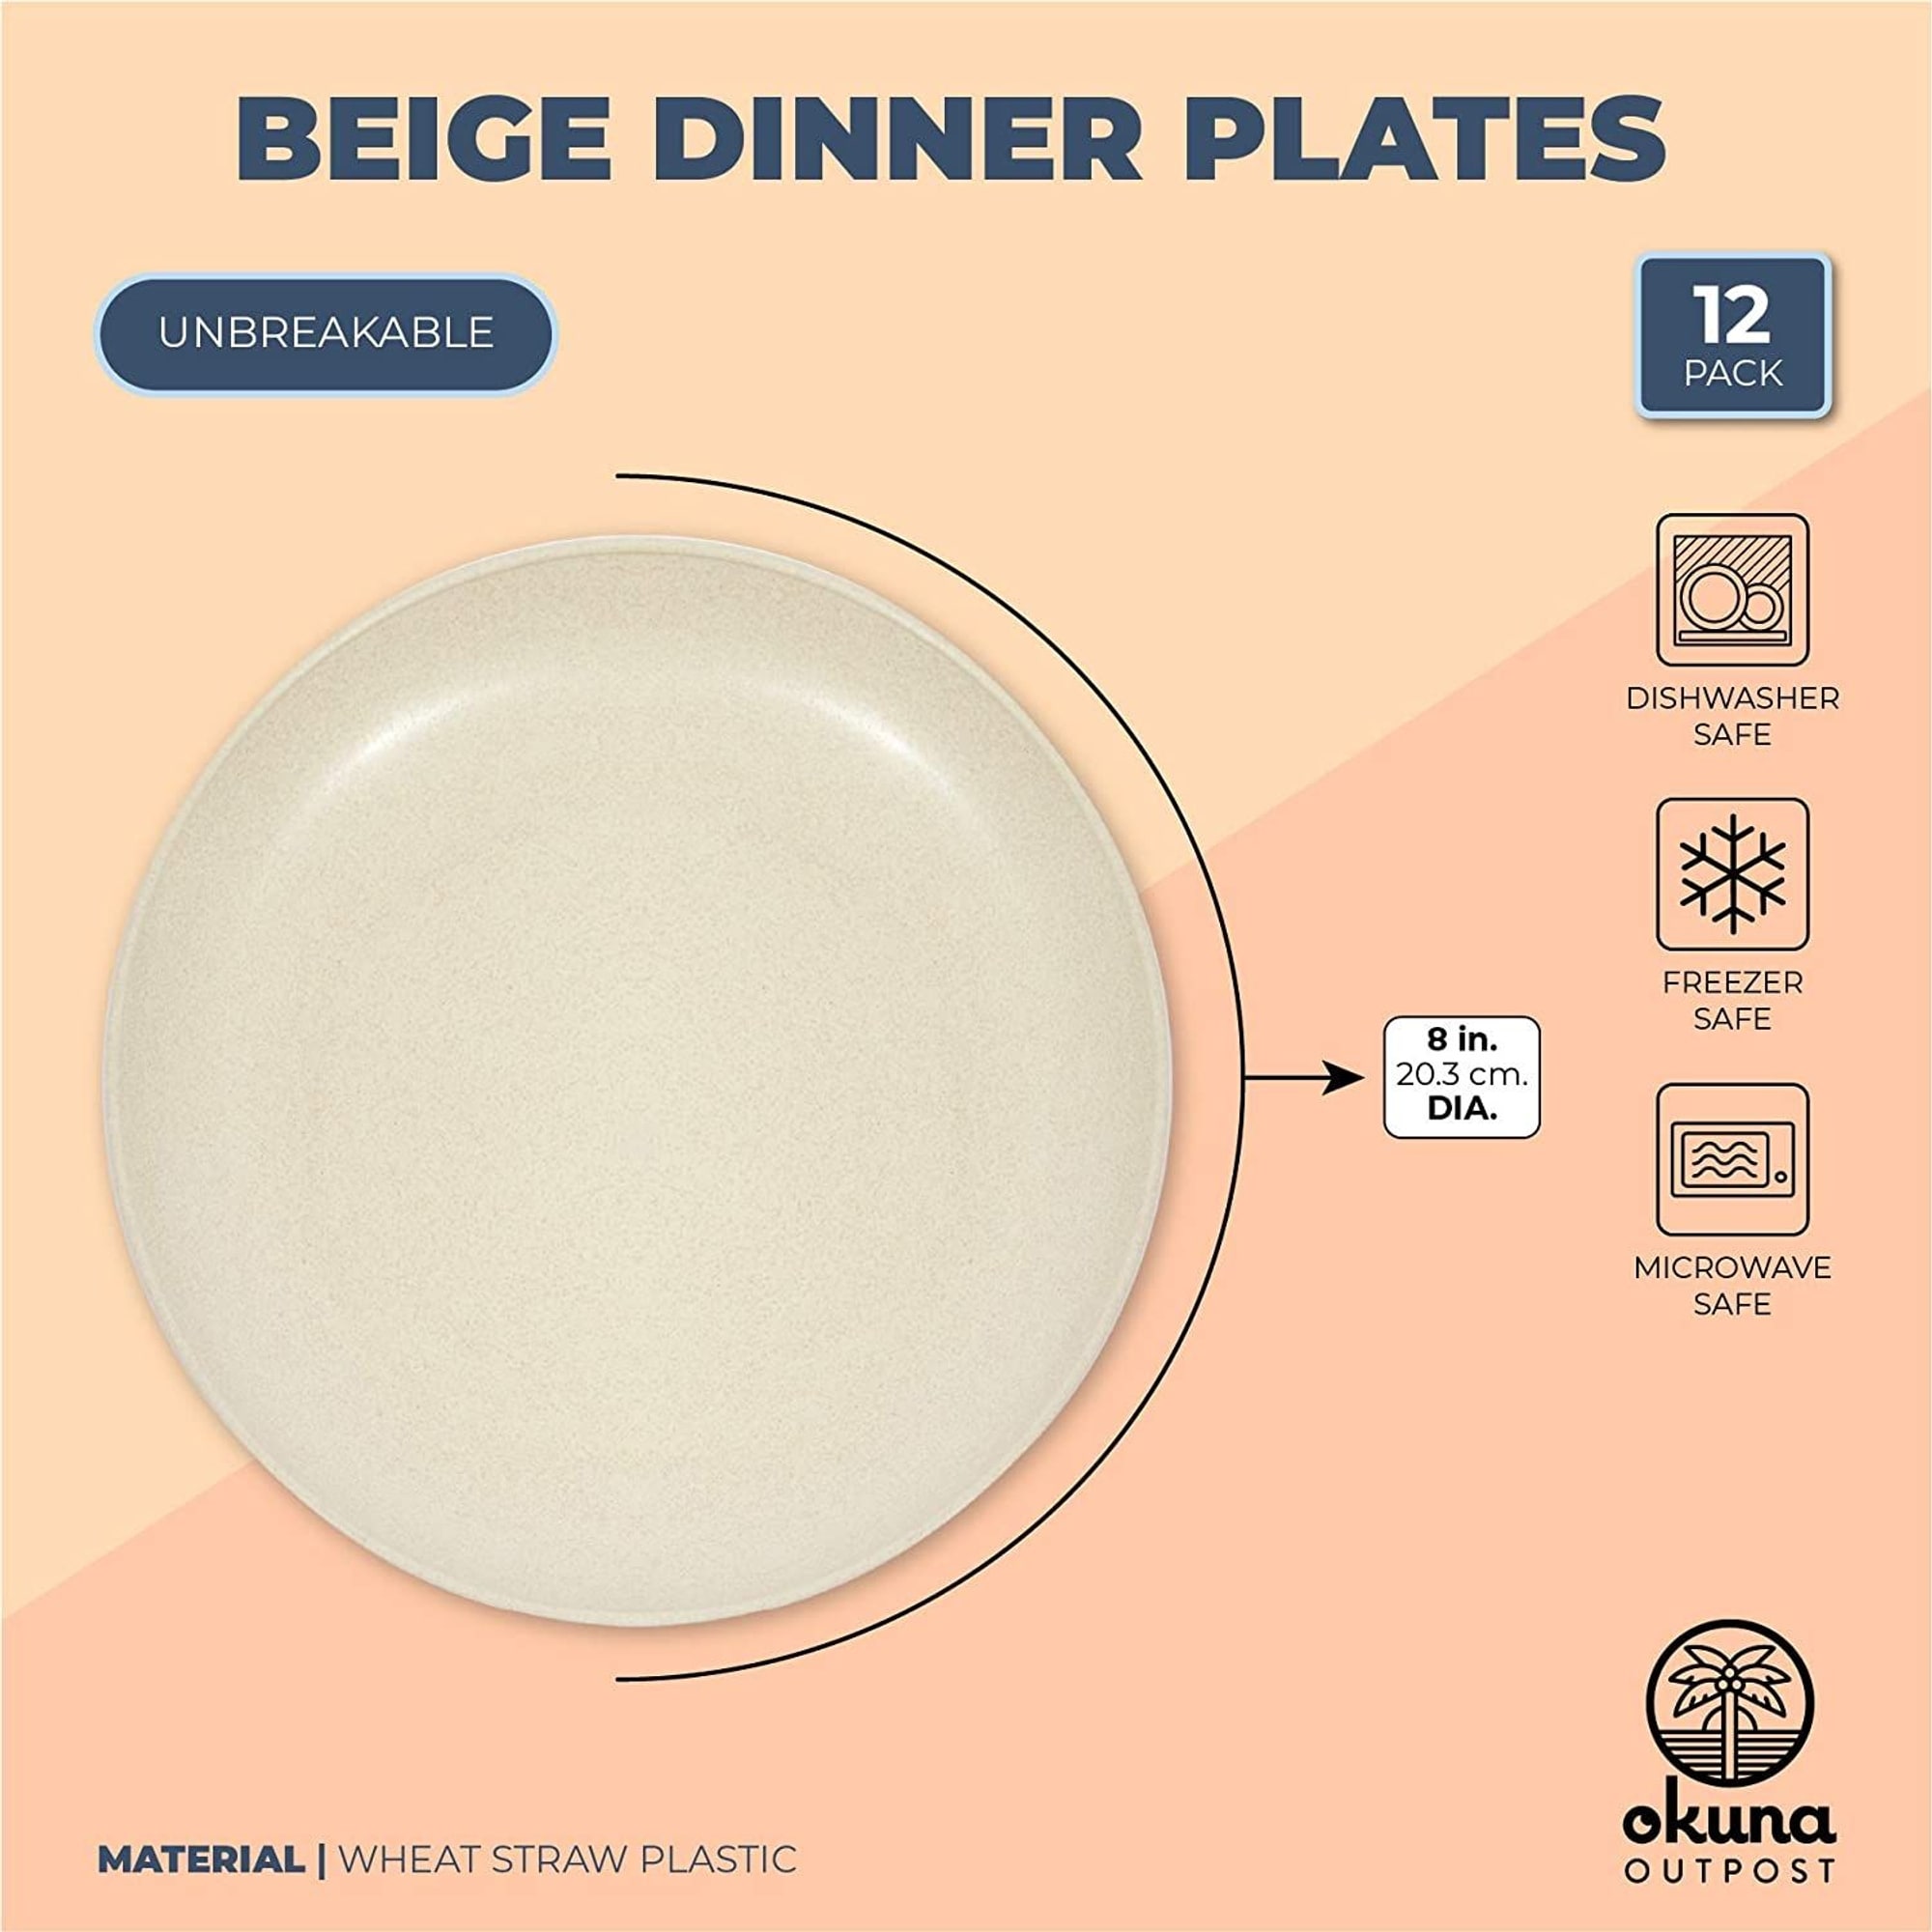 https://ak1.ostkcdn.com/images/products/is/images/direct/0227410a92d3535369b00918b80811ad8fccb6c7/Wheat-Straw-Plates%2C-Unbreakable-Dinner-Plate-%28Beige%2C-8-In%2C-6-Pack%29.jpg